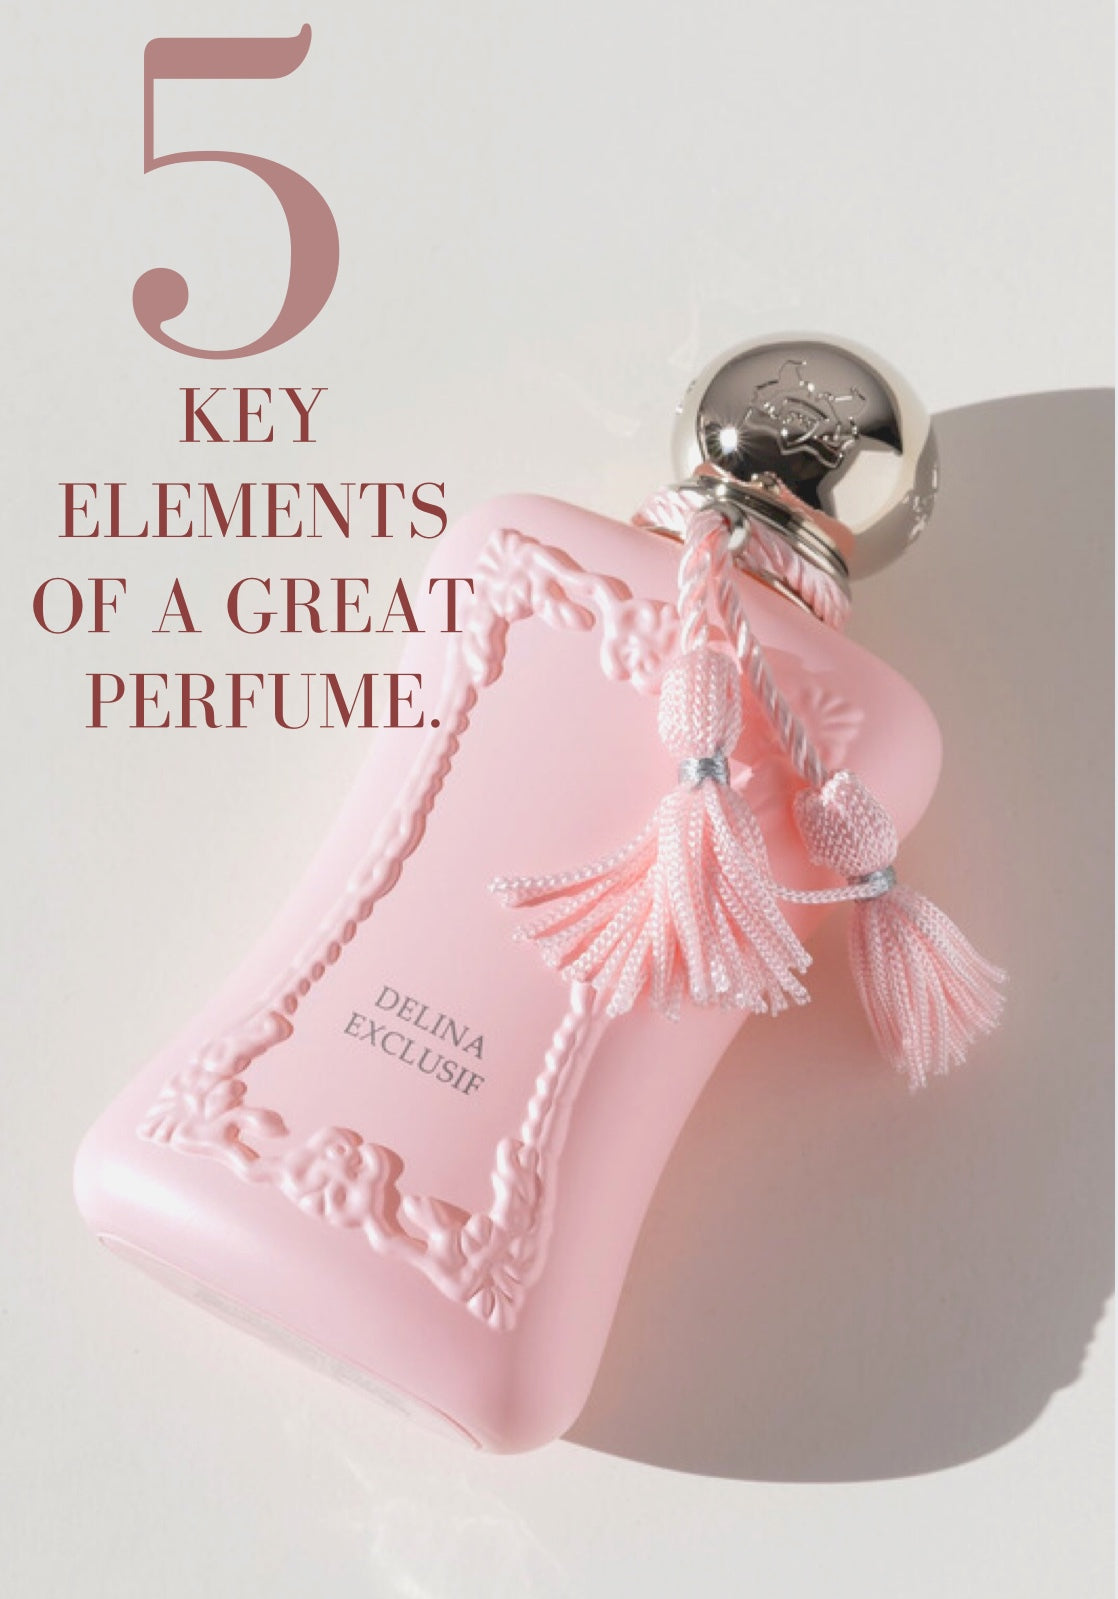 5 KEY ELEMENTS OF A GREAT PERFUME